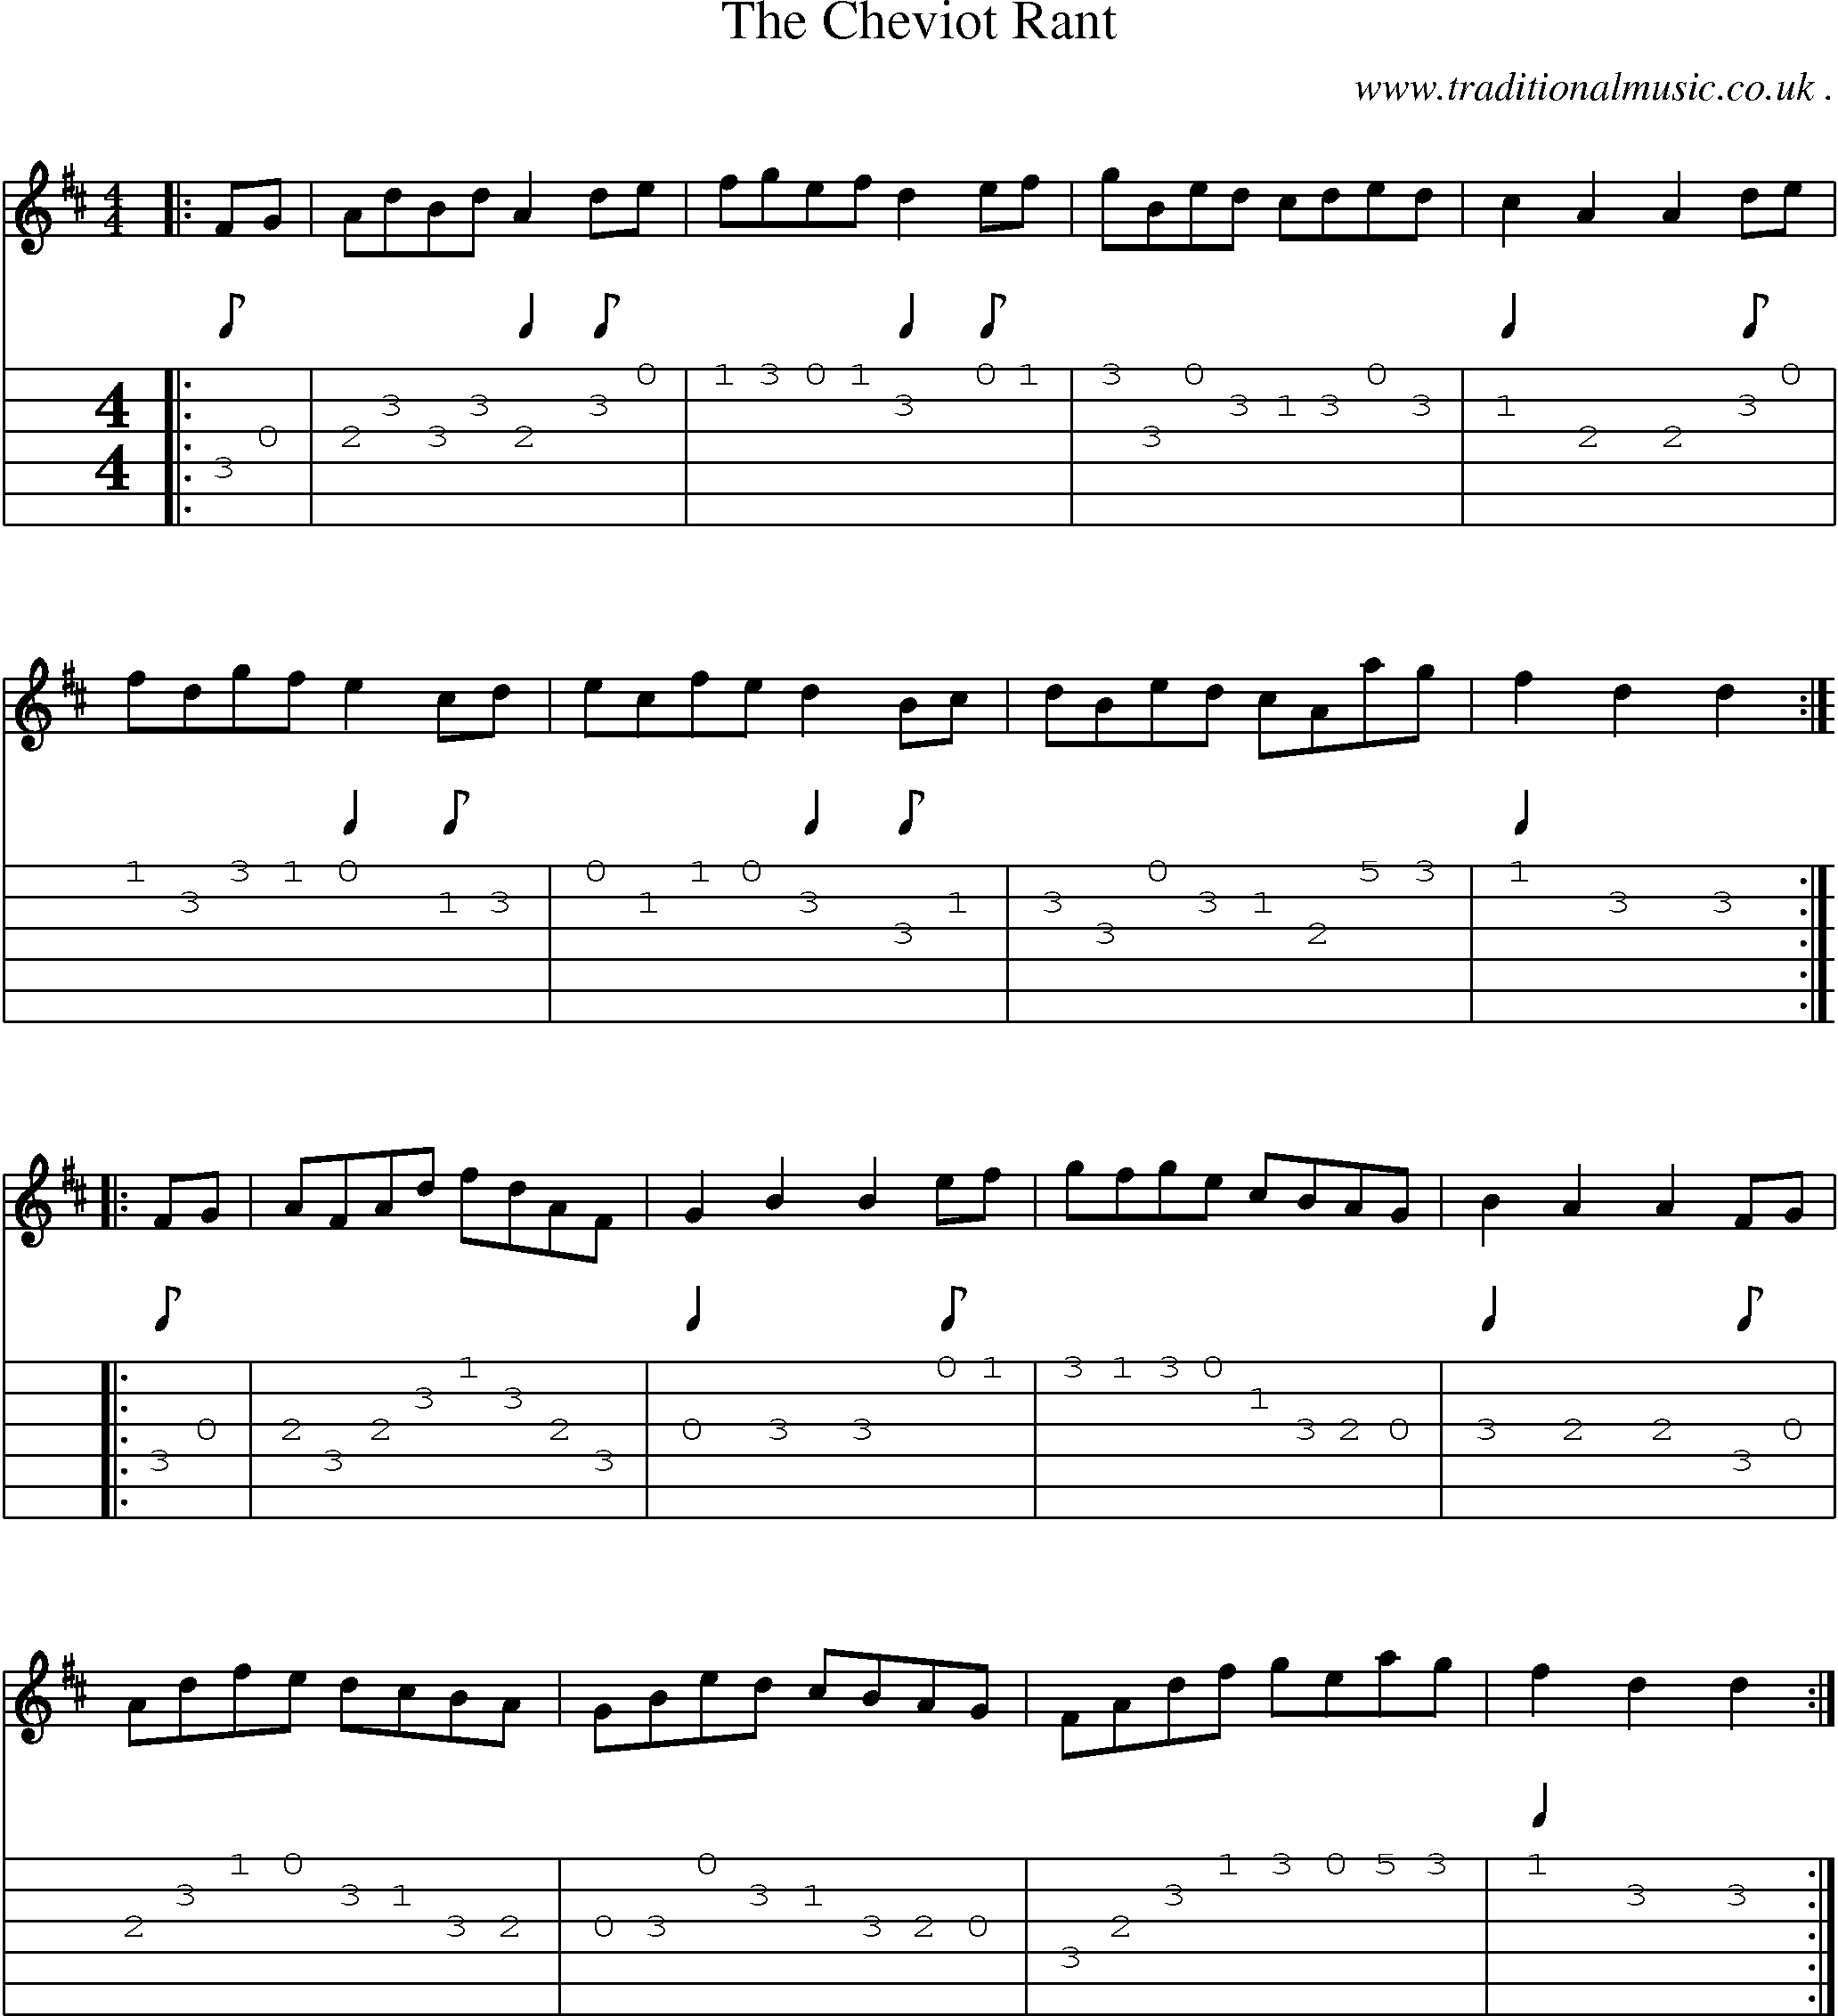 Sheet-Music and Guitar Tabs for The Cheviot Rant